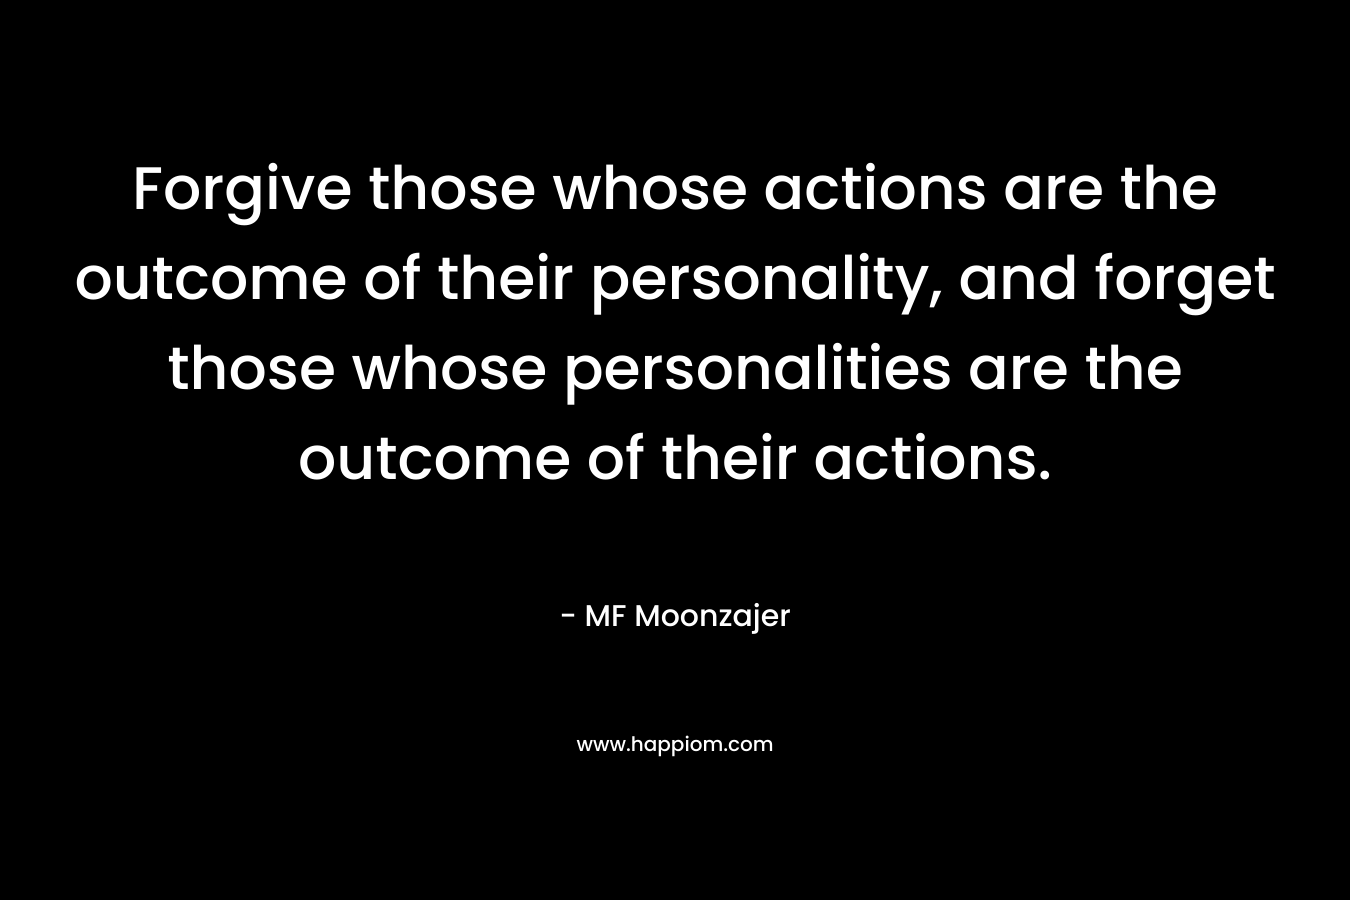 Forgive those whose actions are the outcome of their personality, and forget those whose personalities are the outcome of their actions. – MF Moonzajer